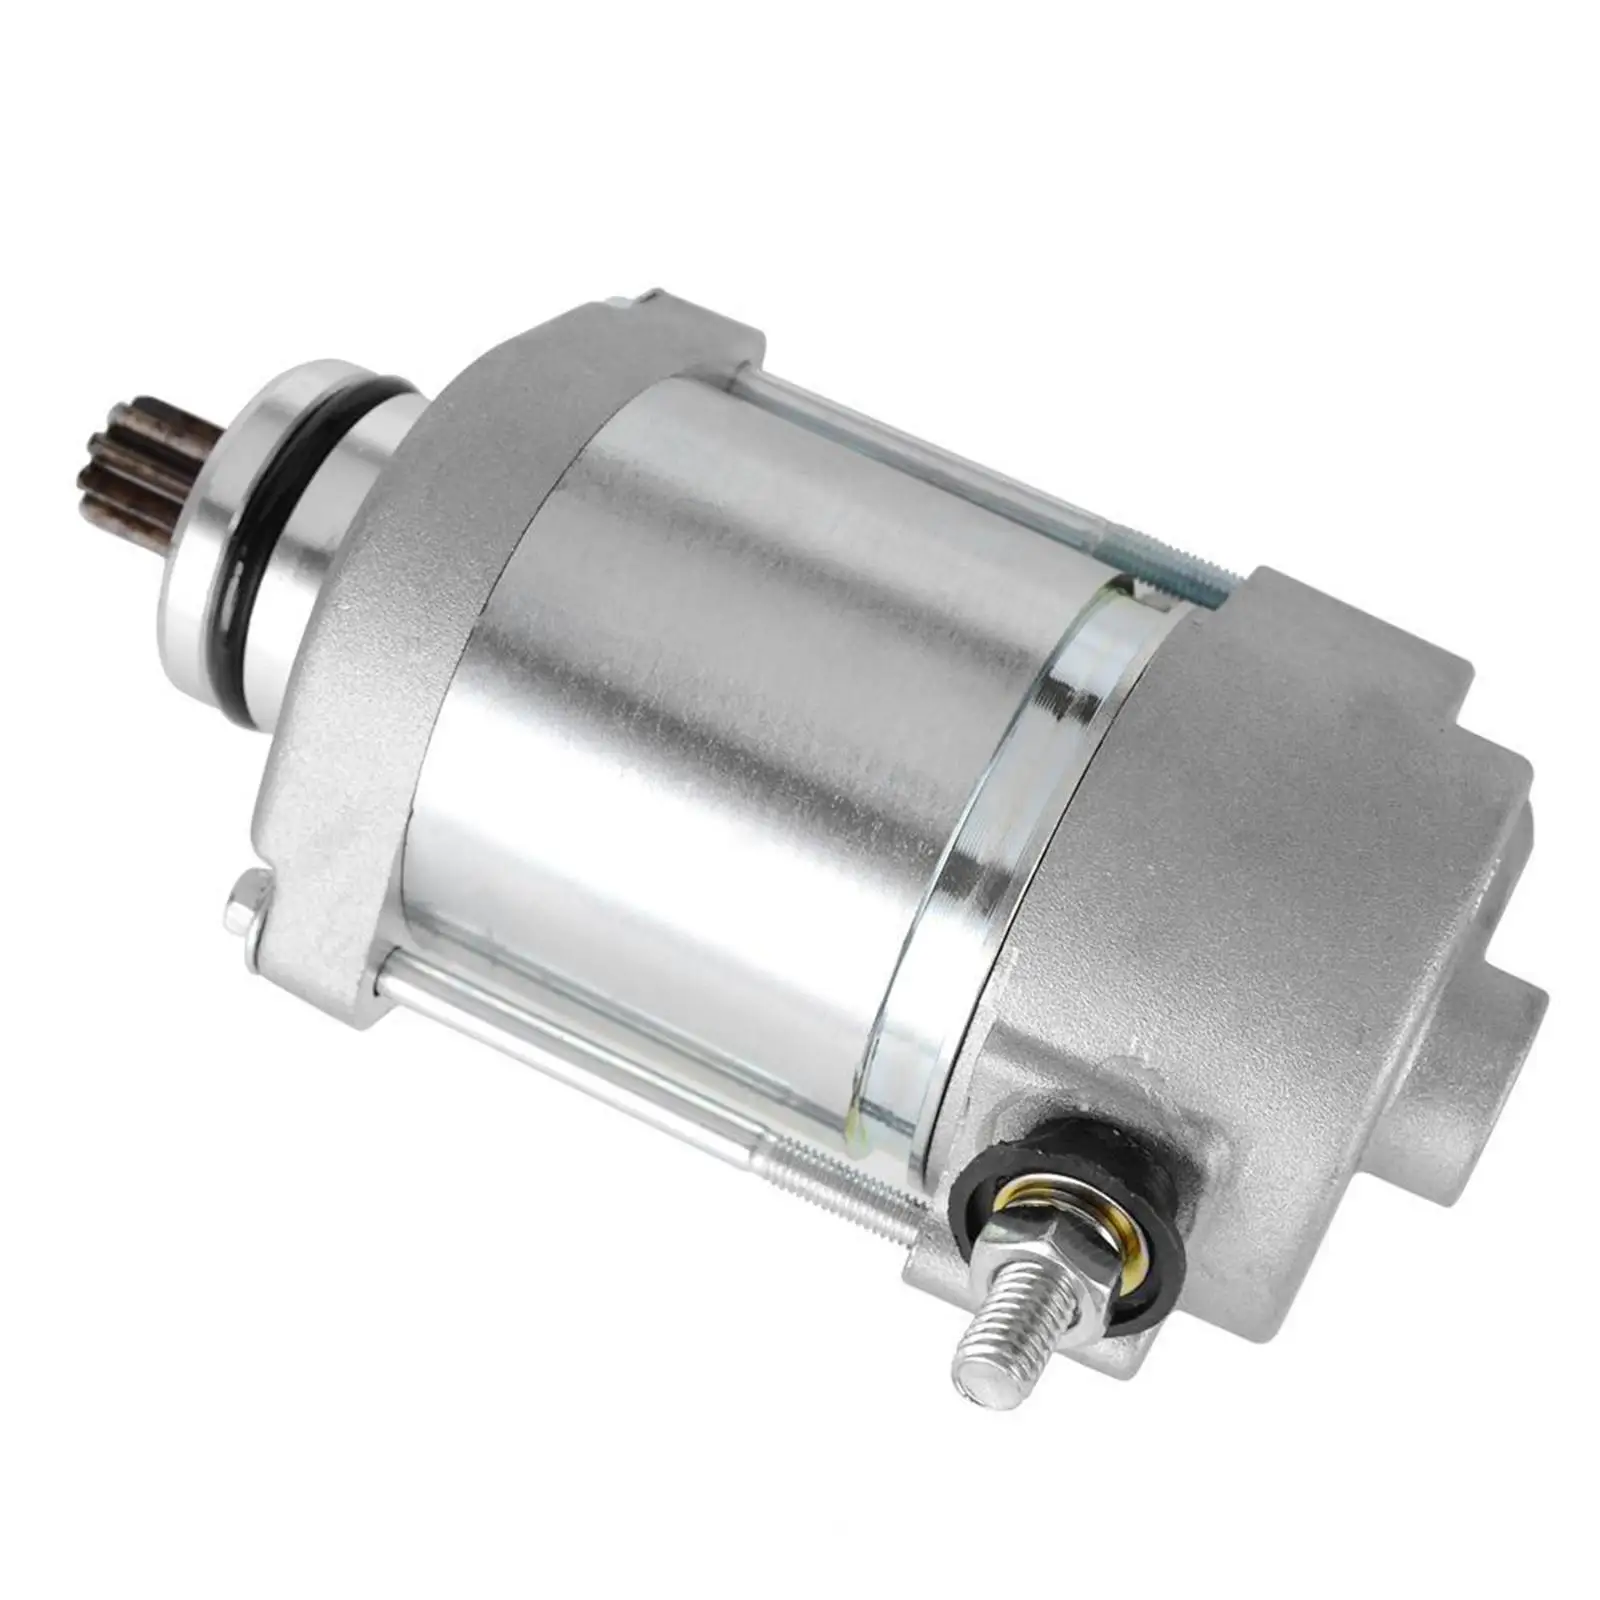 Starter Motor High Quality Accessories 464244 for Ktm 200 250 300 Exc